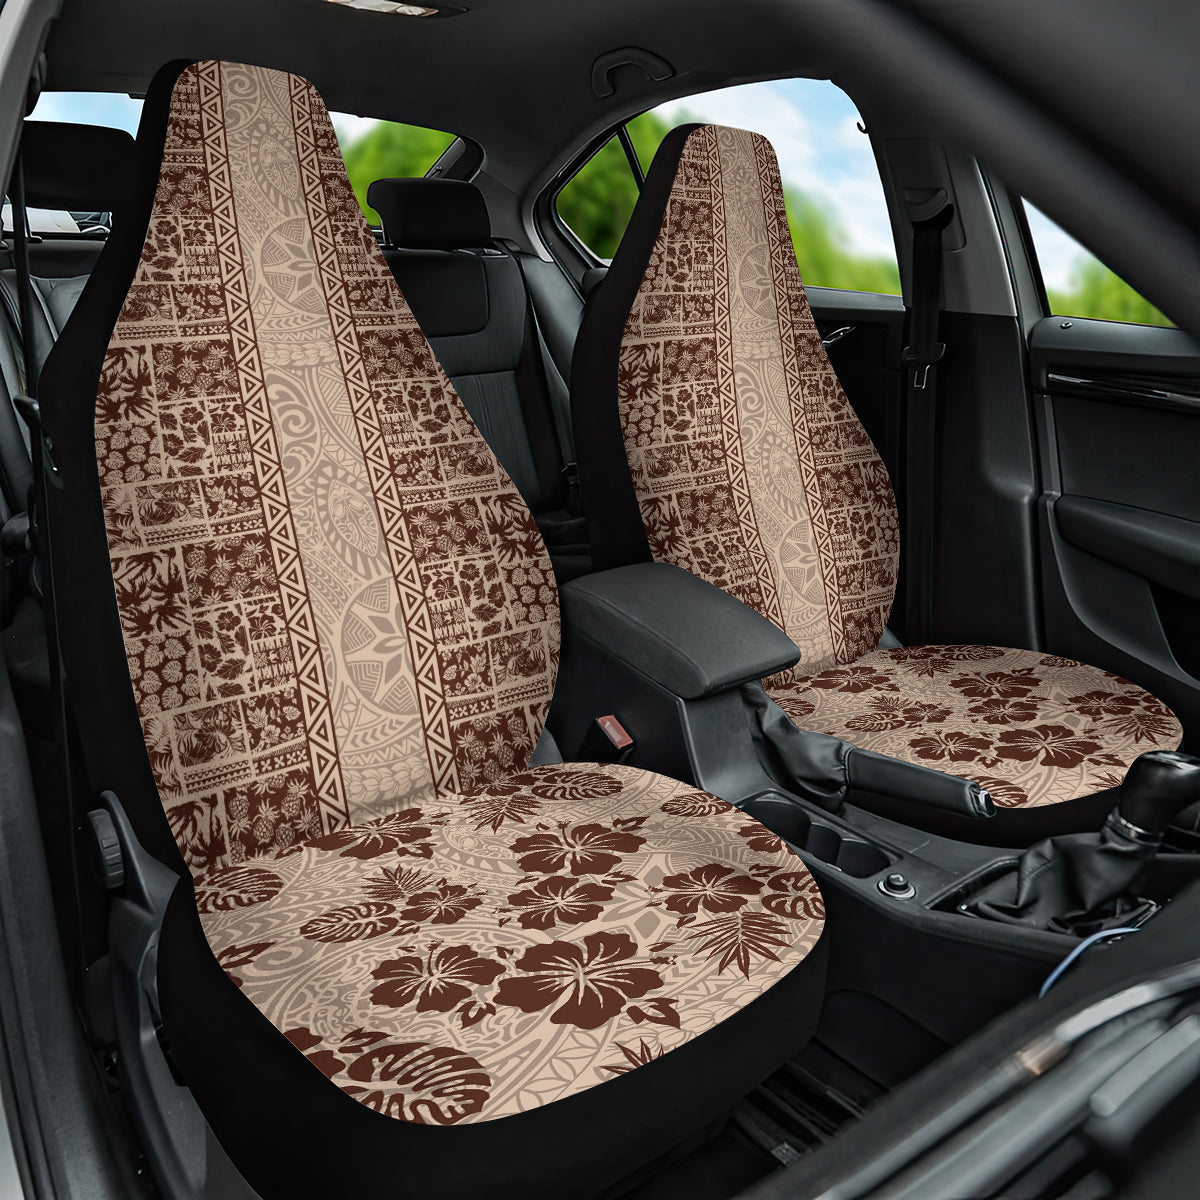 Hawaii Style Hibiscus and Tribal Element Fabric Patchwork Car Seat Cover Beige Version LT03 One Size Beige - Polynesian Pride